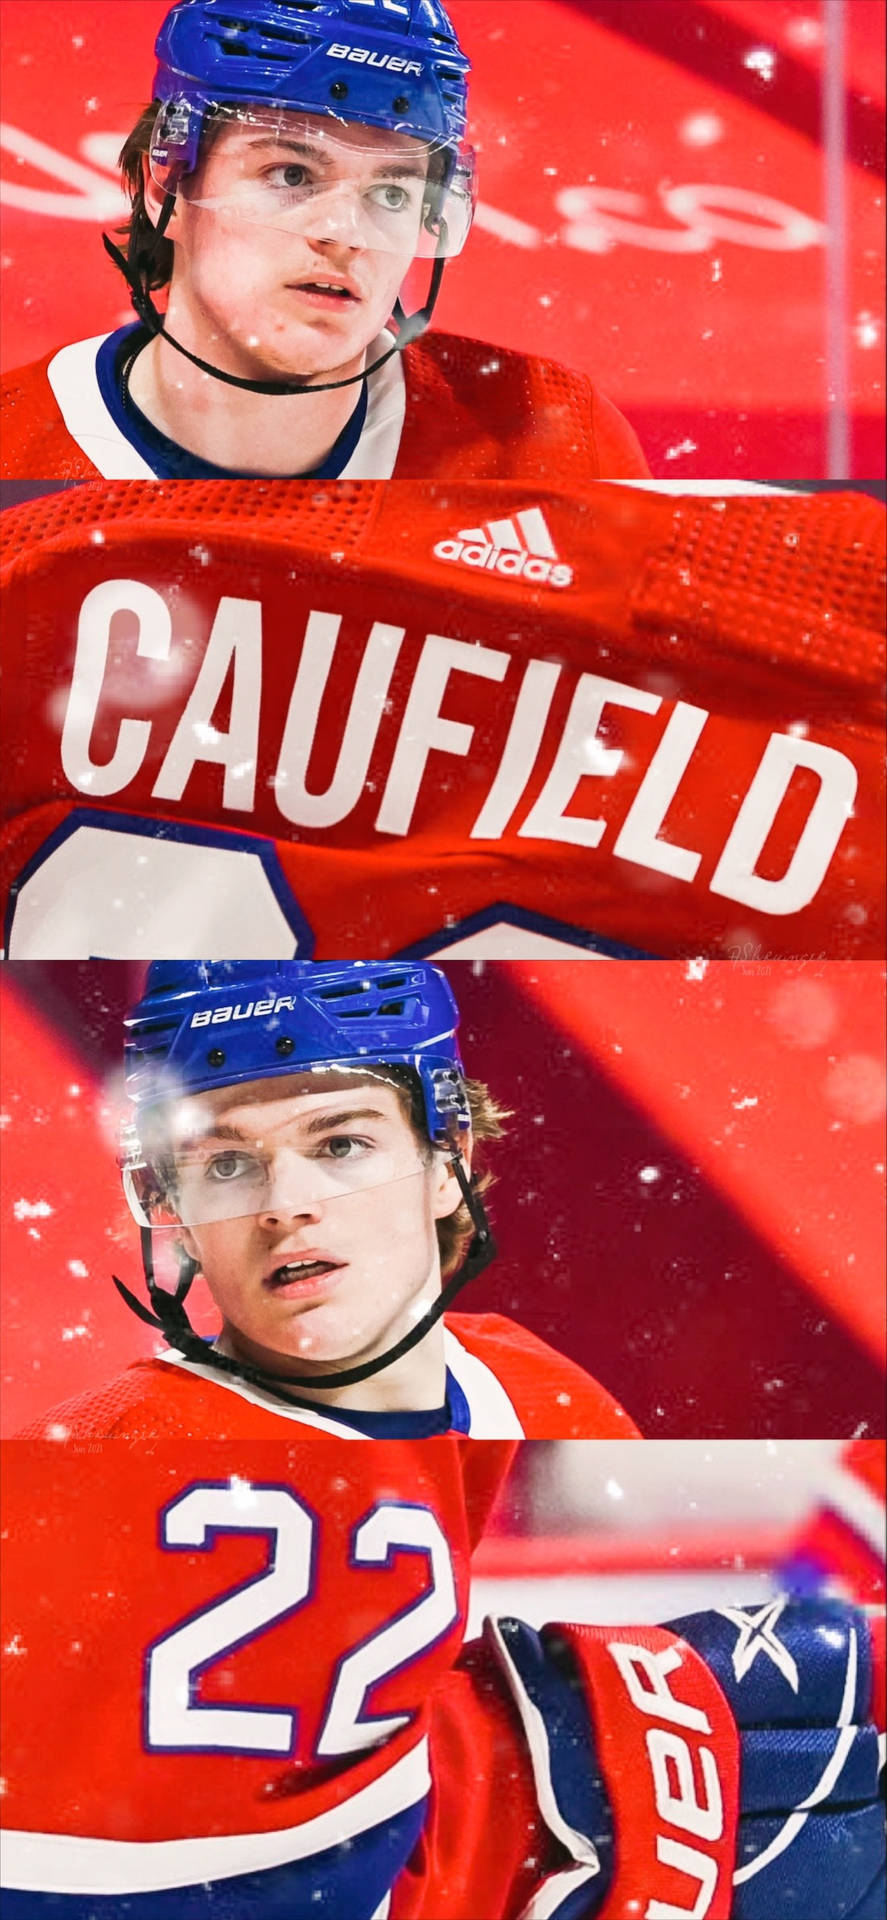 Cole Caufield Ice Hockey Player Details Collage Wallpaper